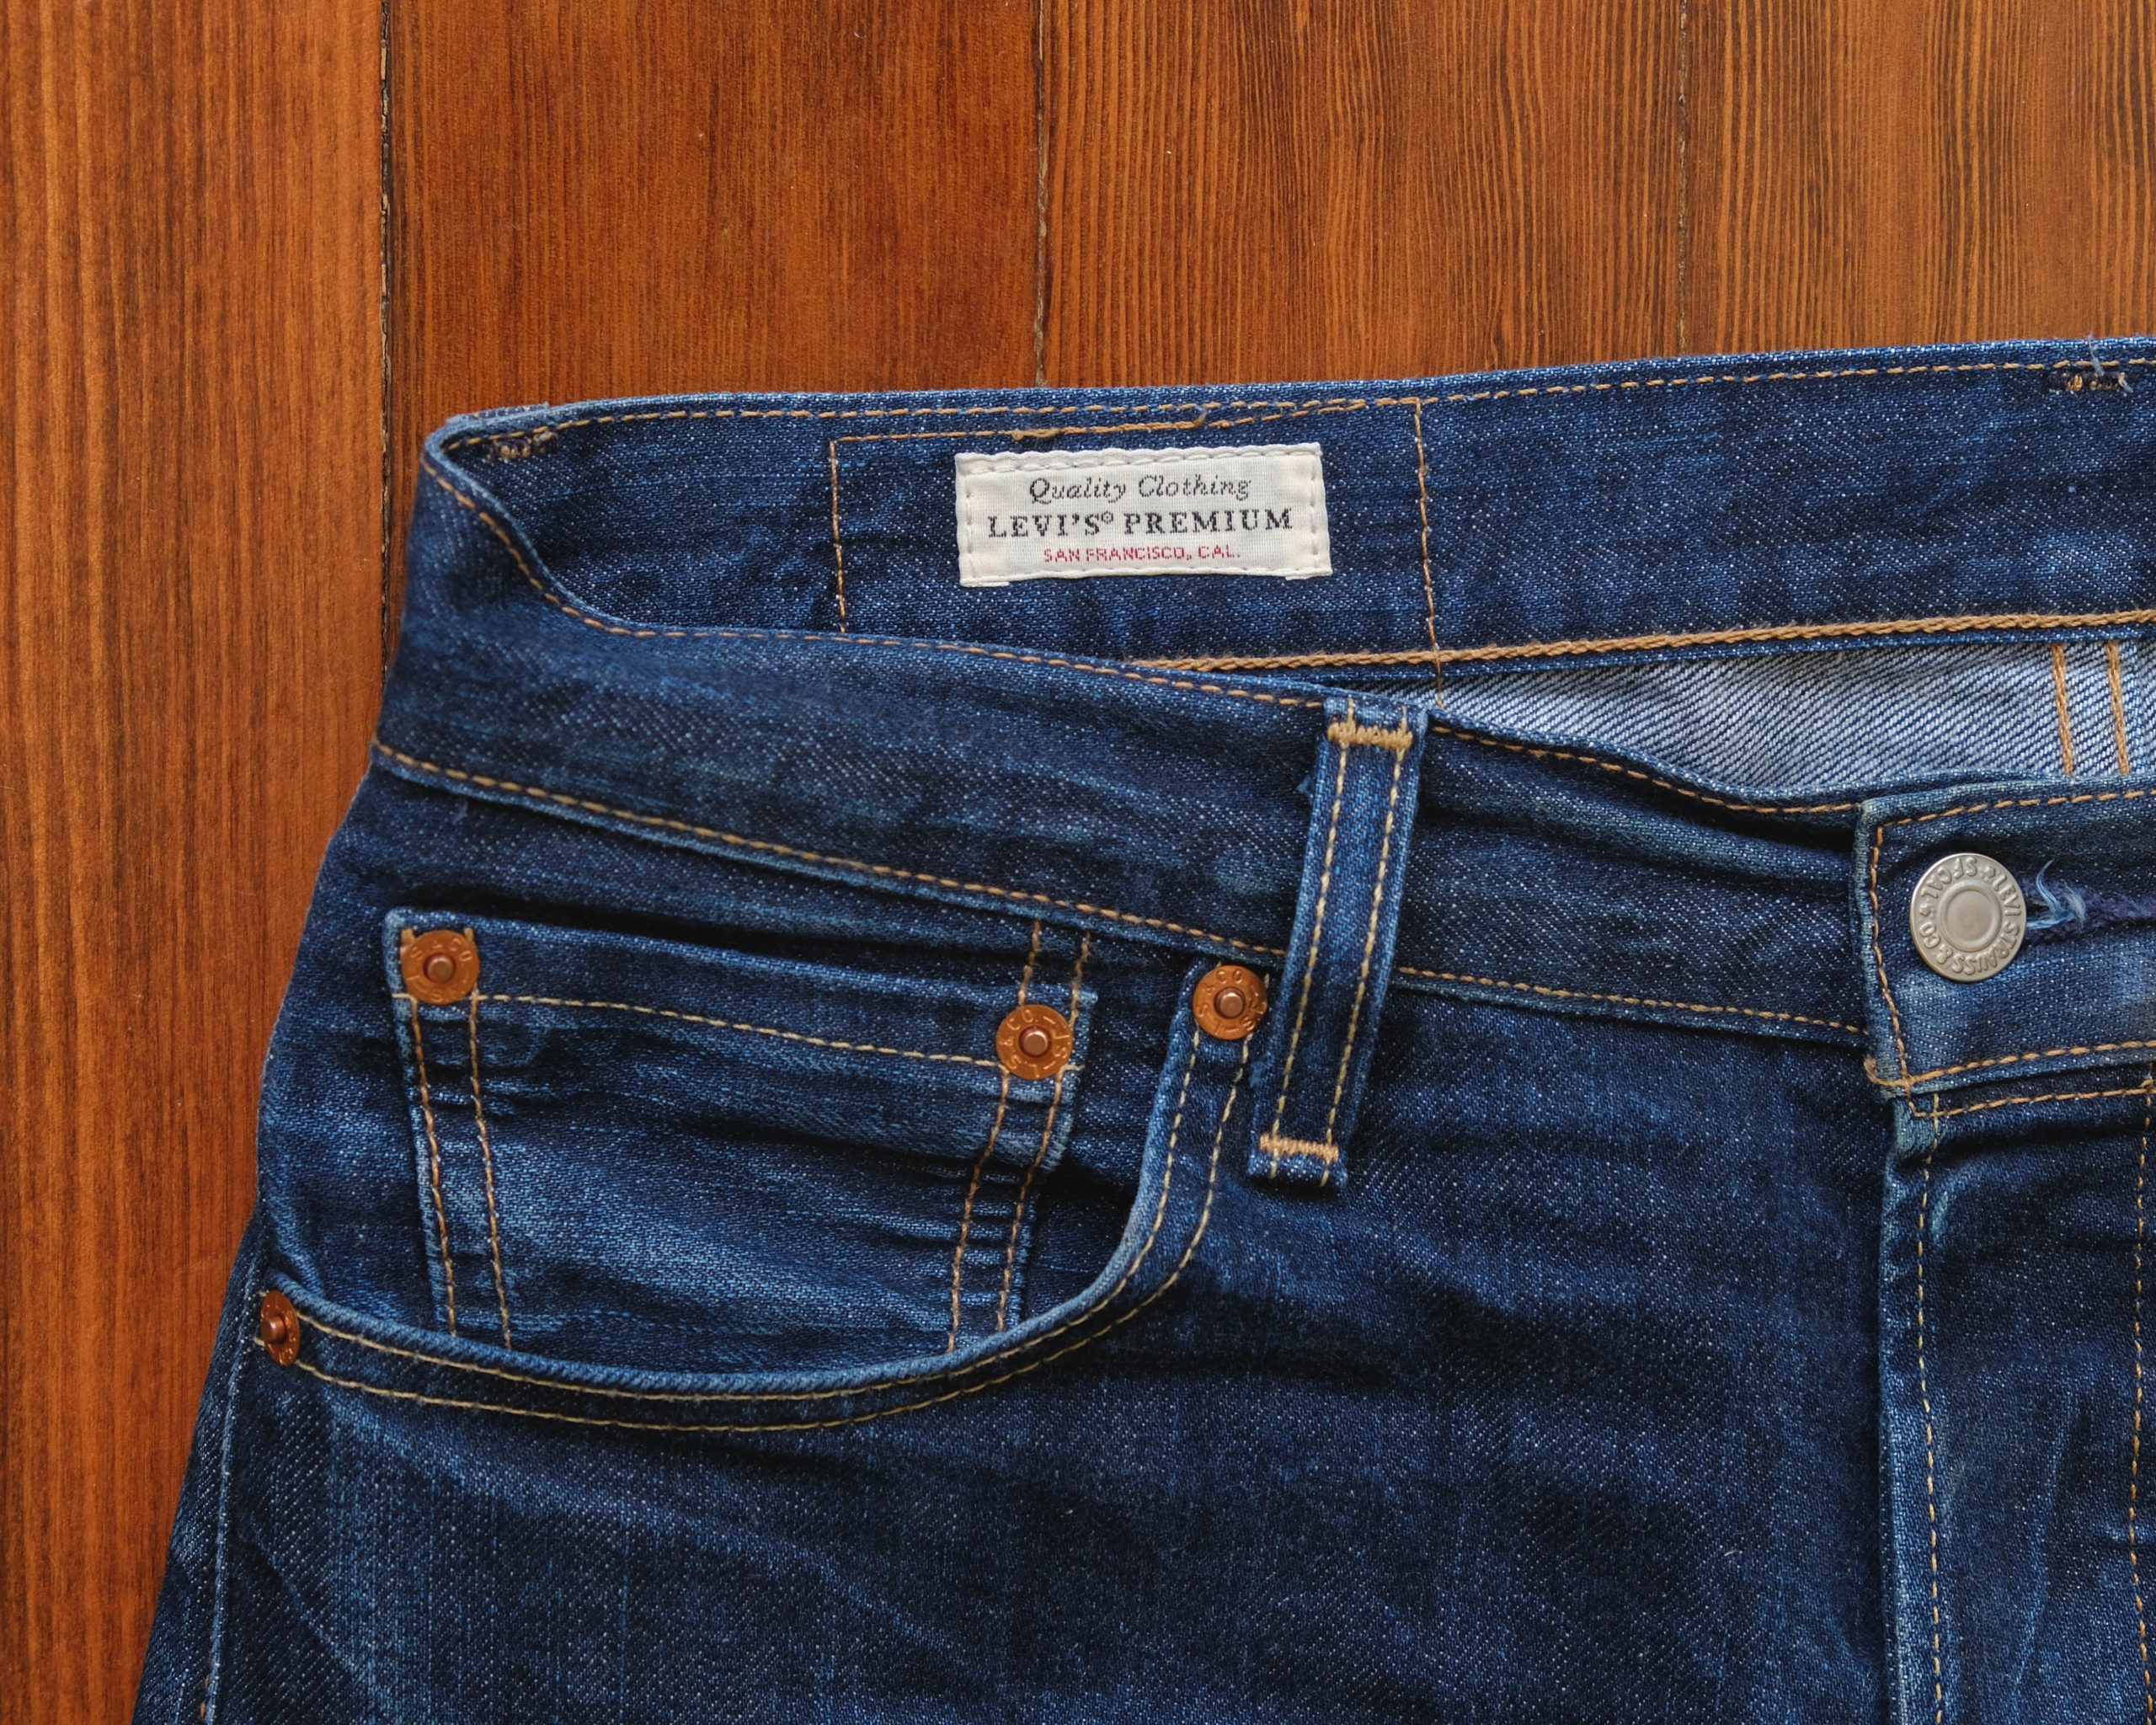 Men's Levi's Jeans | Ultimate Buying Guide | Fit, Colors, Materials & More